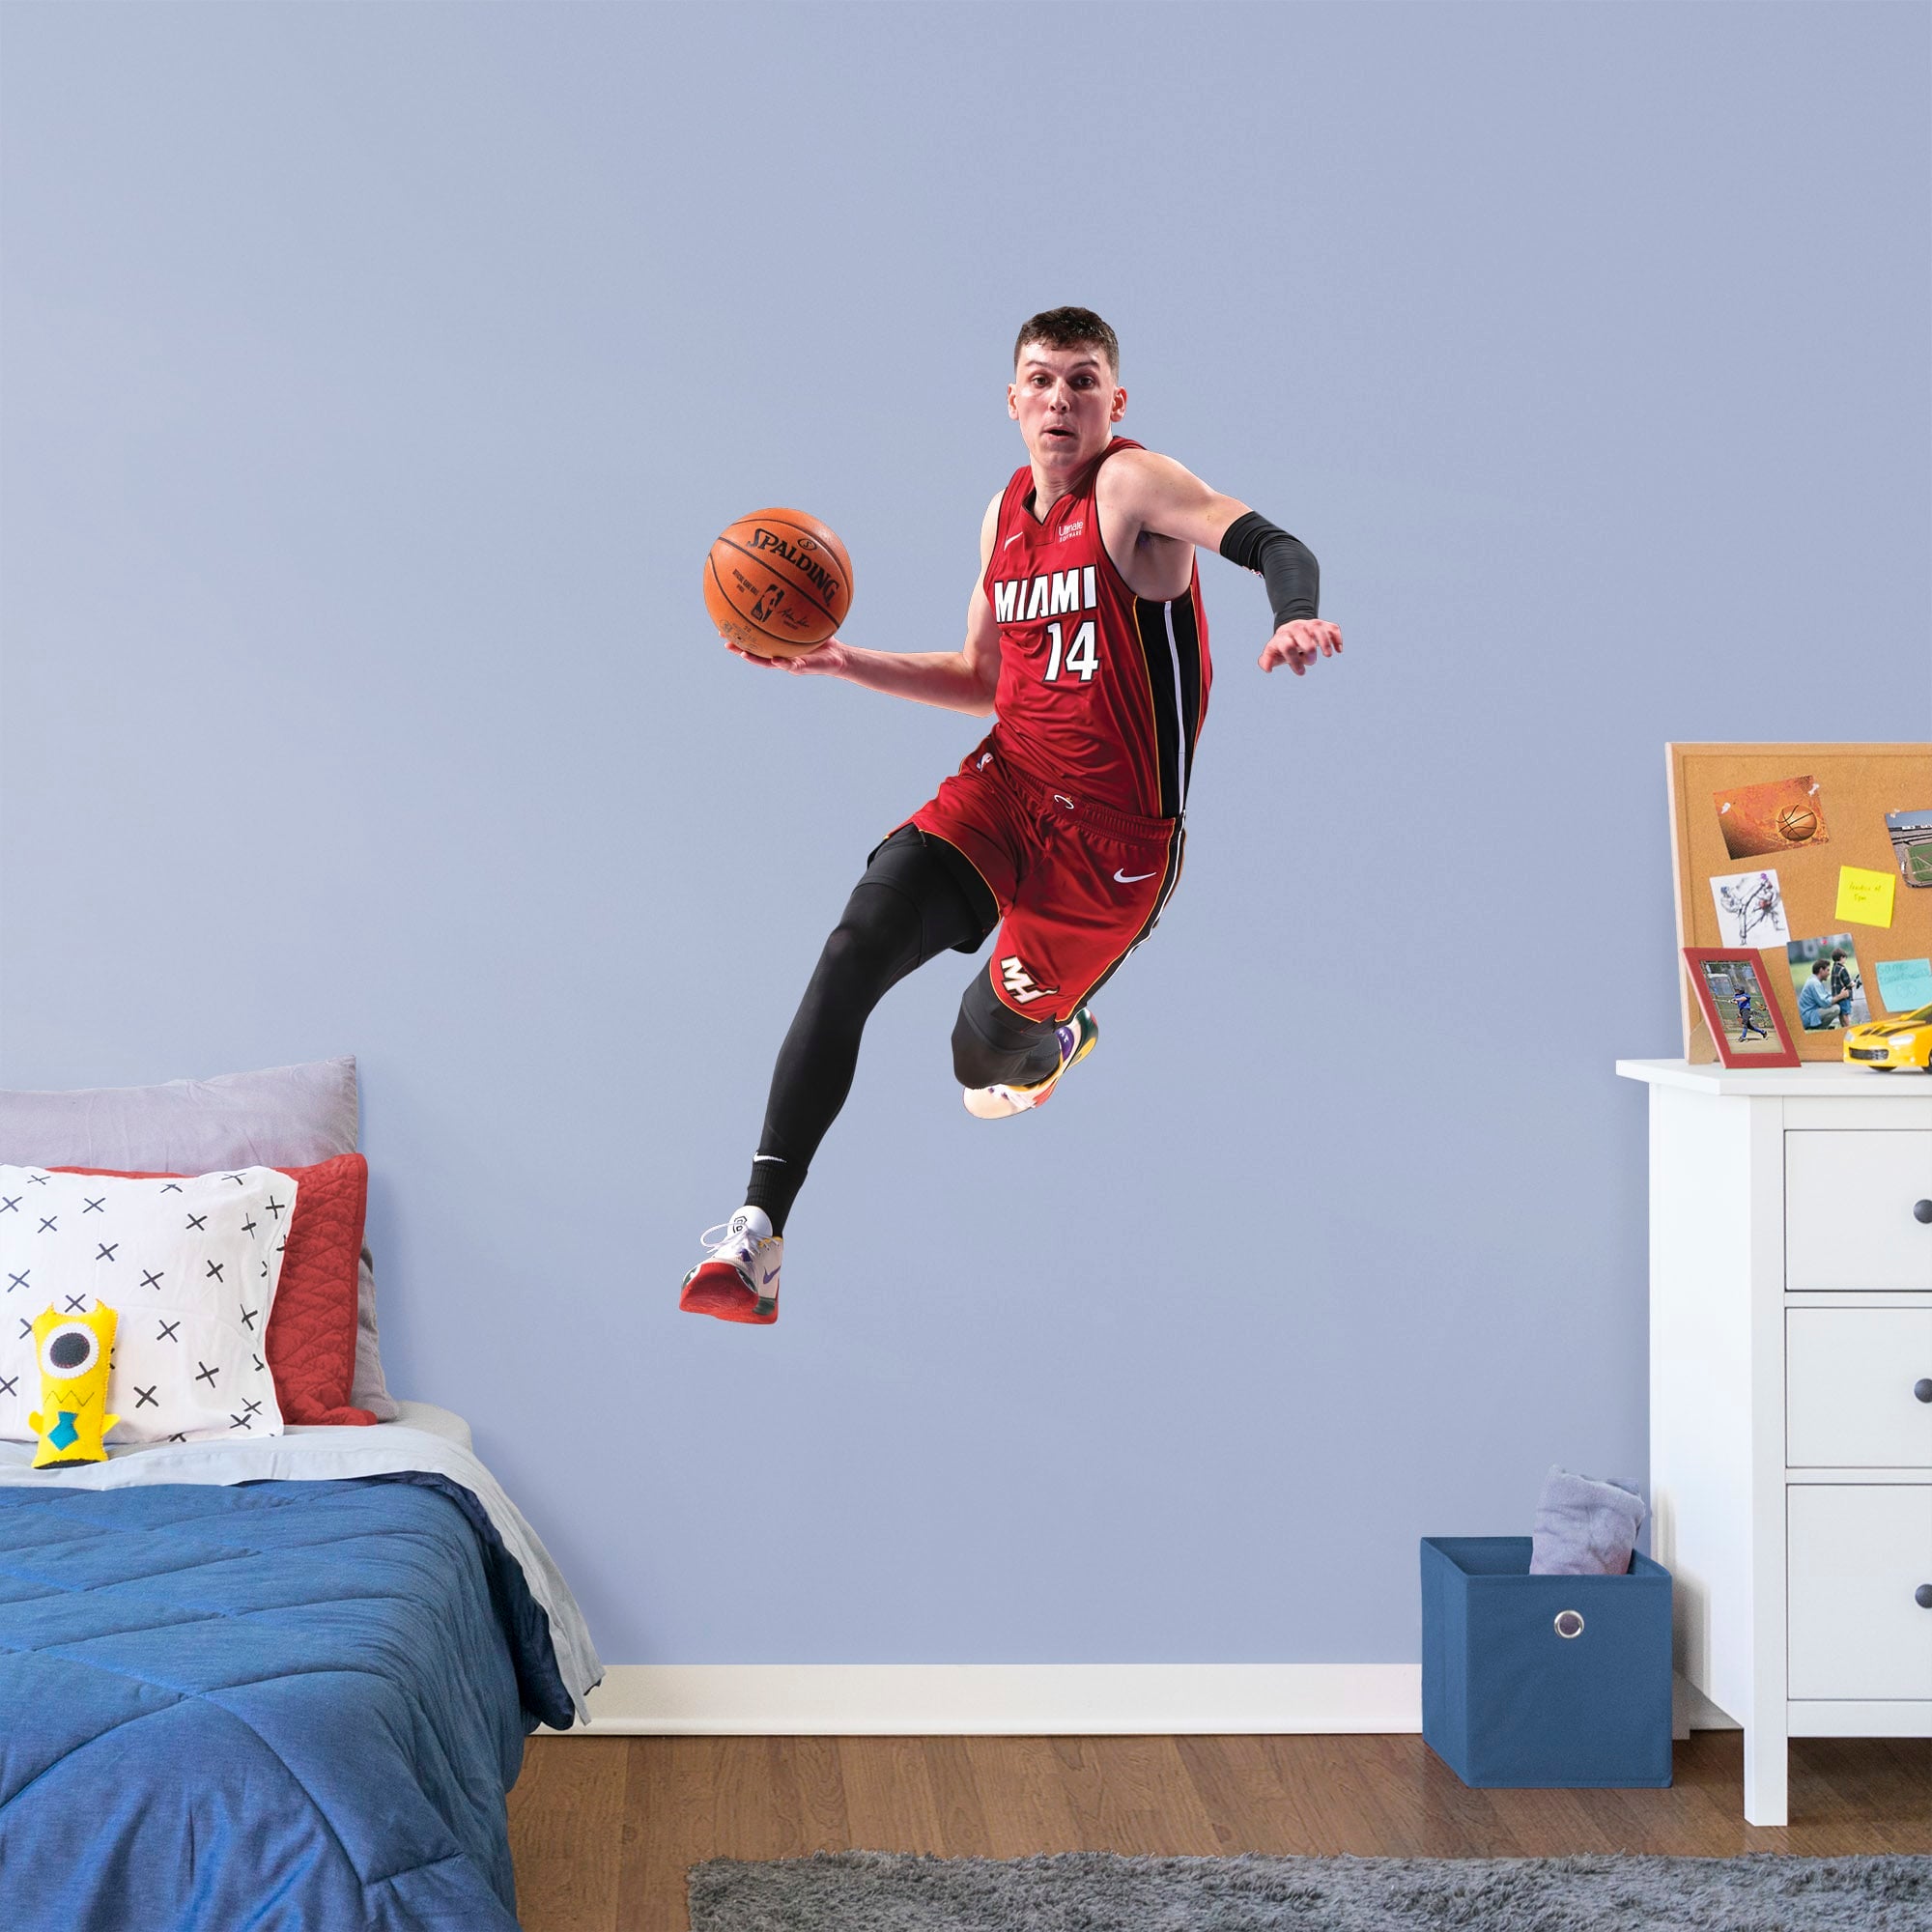 Tyler Herro for Miami Heat - Officially Licensed NBA Removable Wall Decal Giant Athlete + 2 Decals (33"W x 51"H) by Fathead | Vi